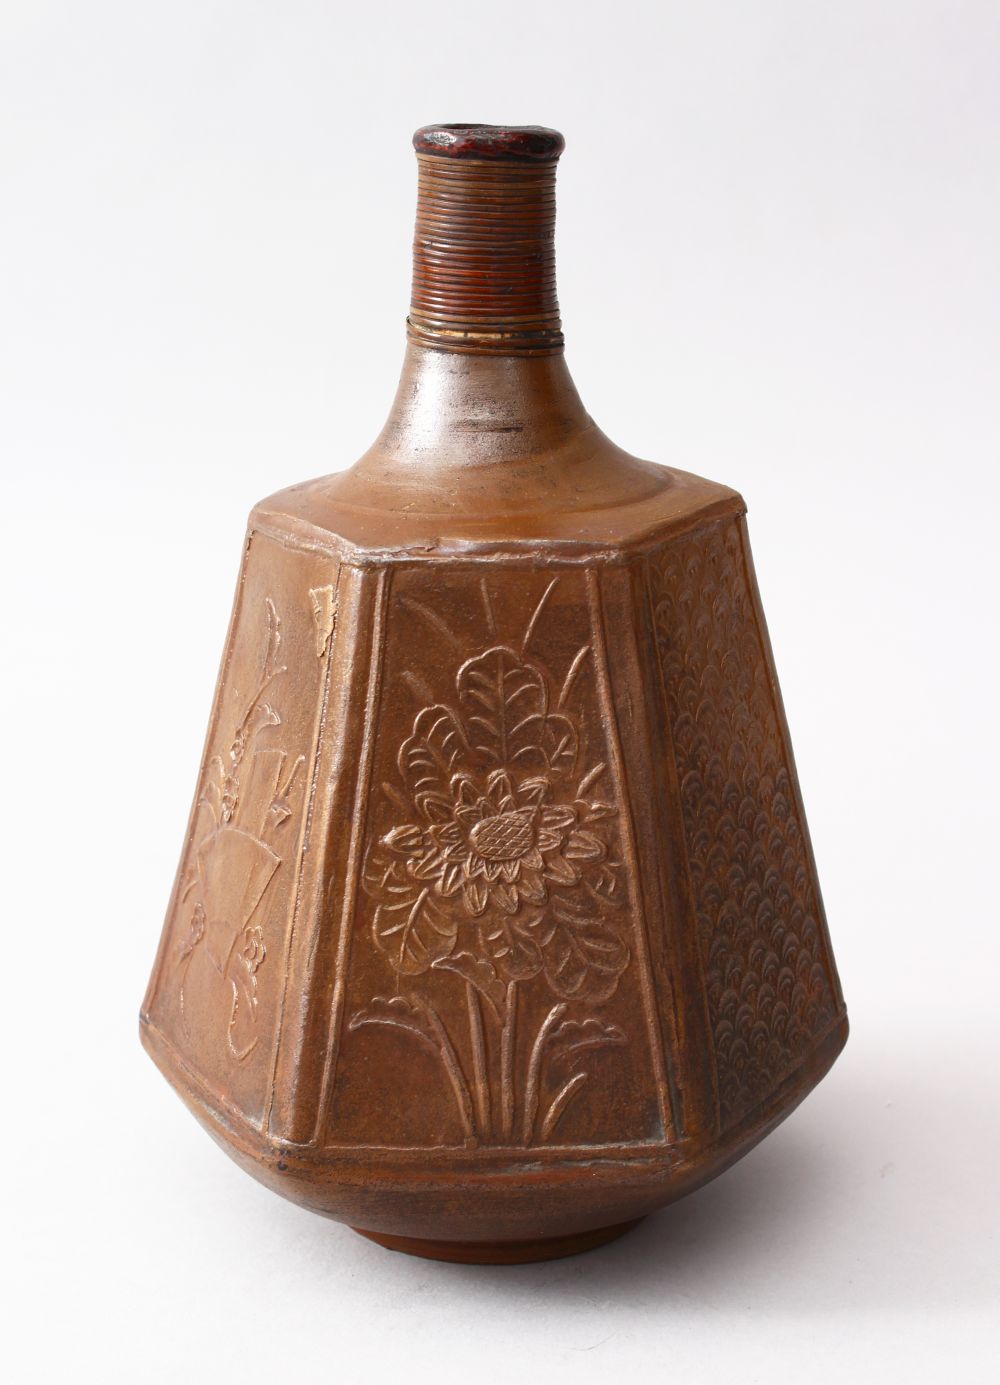 A GOOD JAPANESE MEIJI PERIOD HEXAGONAL STONEWARE SAKE FLASK, the body with panels of carved floral